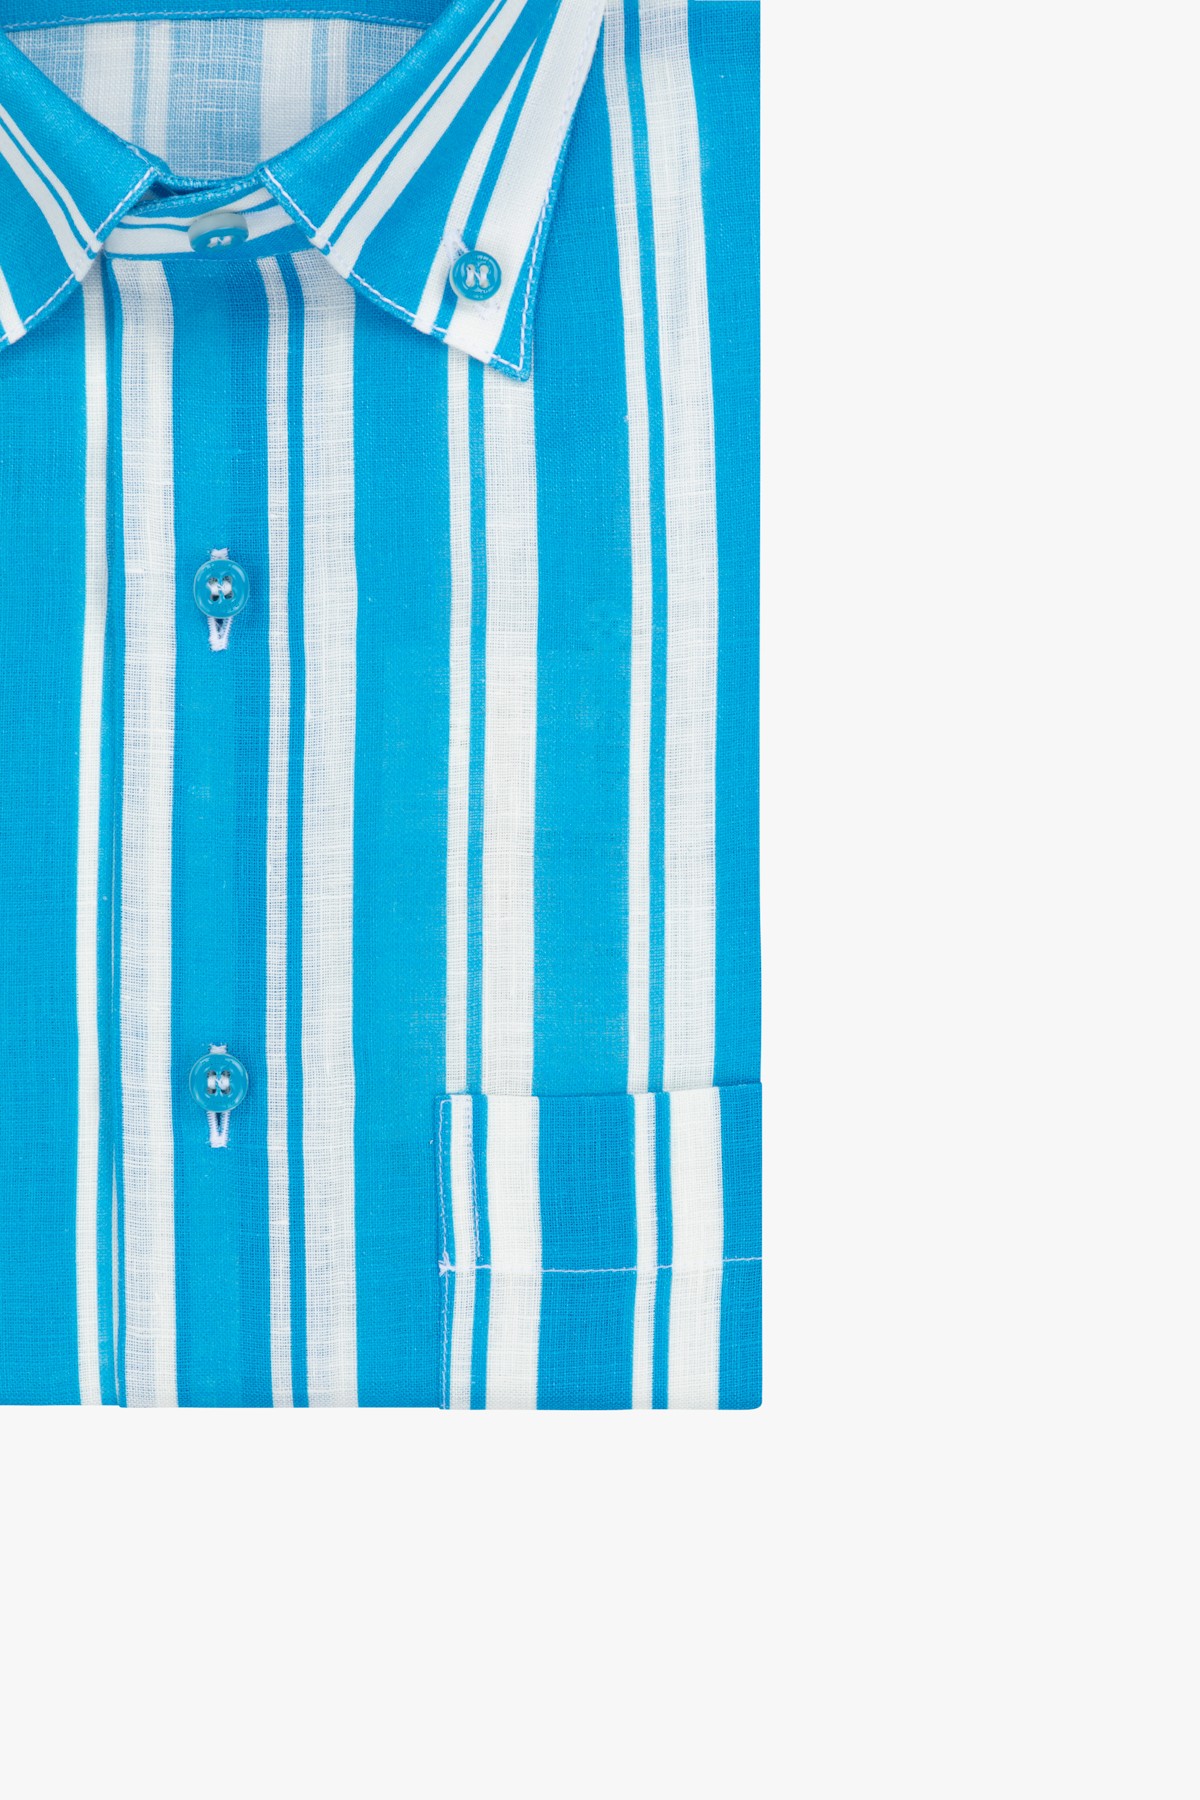 Turquoise blue and white striped shirt